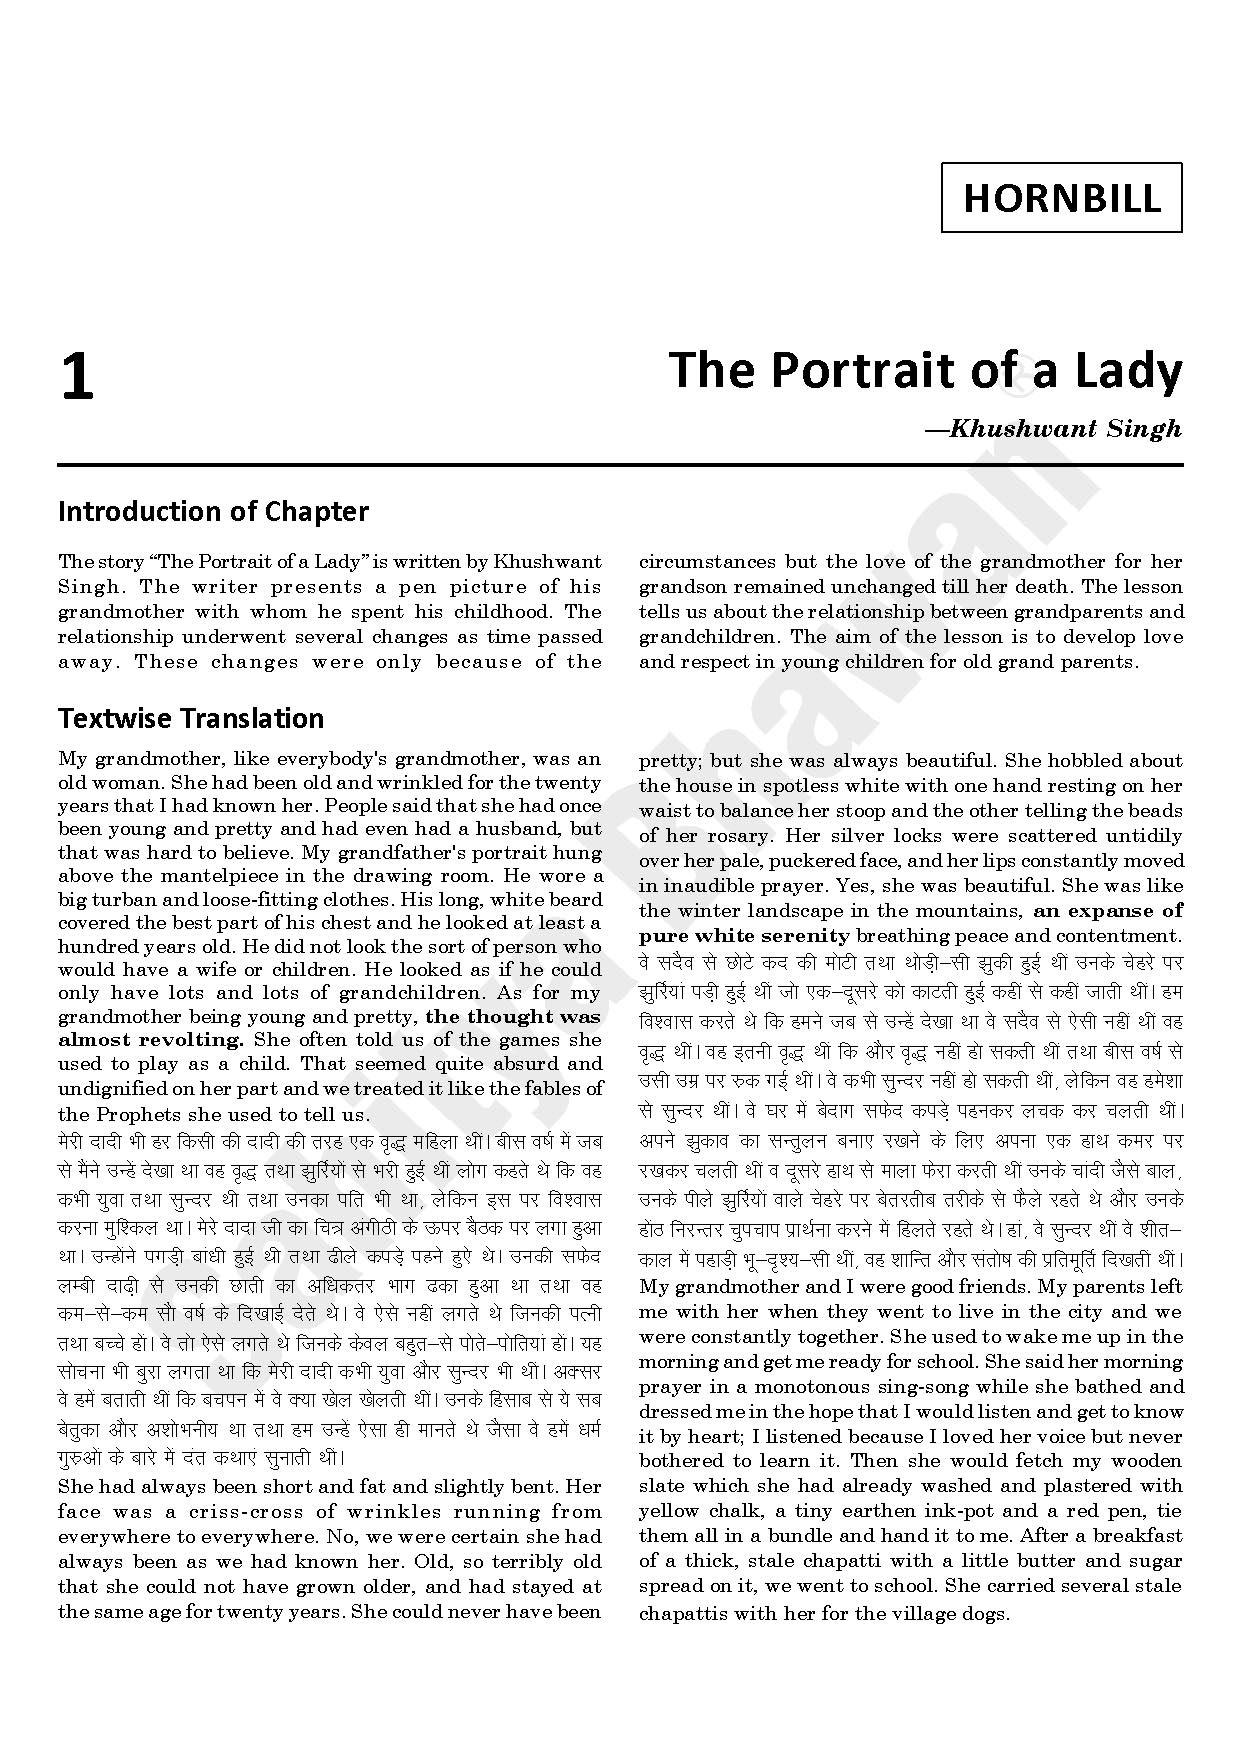 character sketch of grandmother in the portrait of a lady by khushwant singh  class 11 chapter 1  YouTube